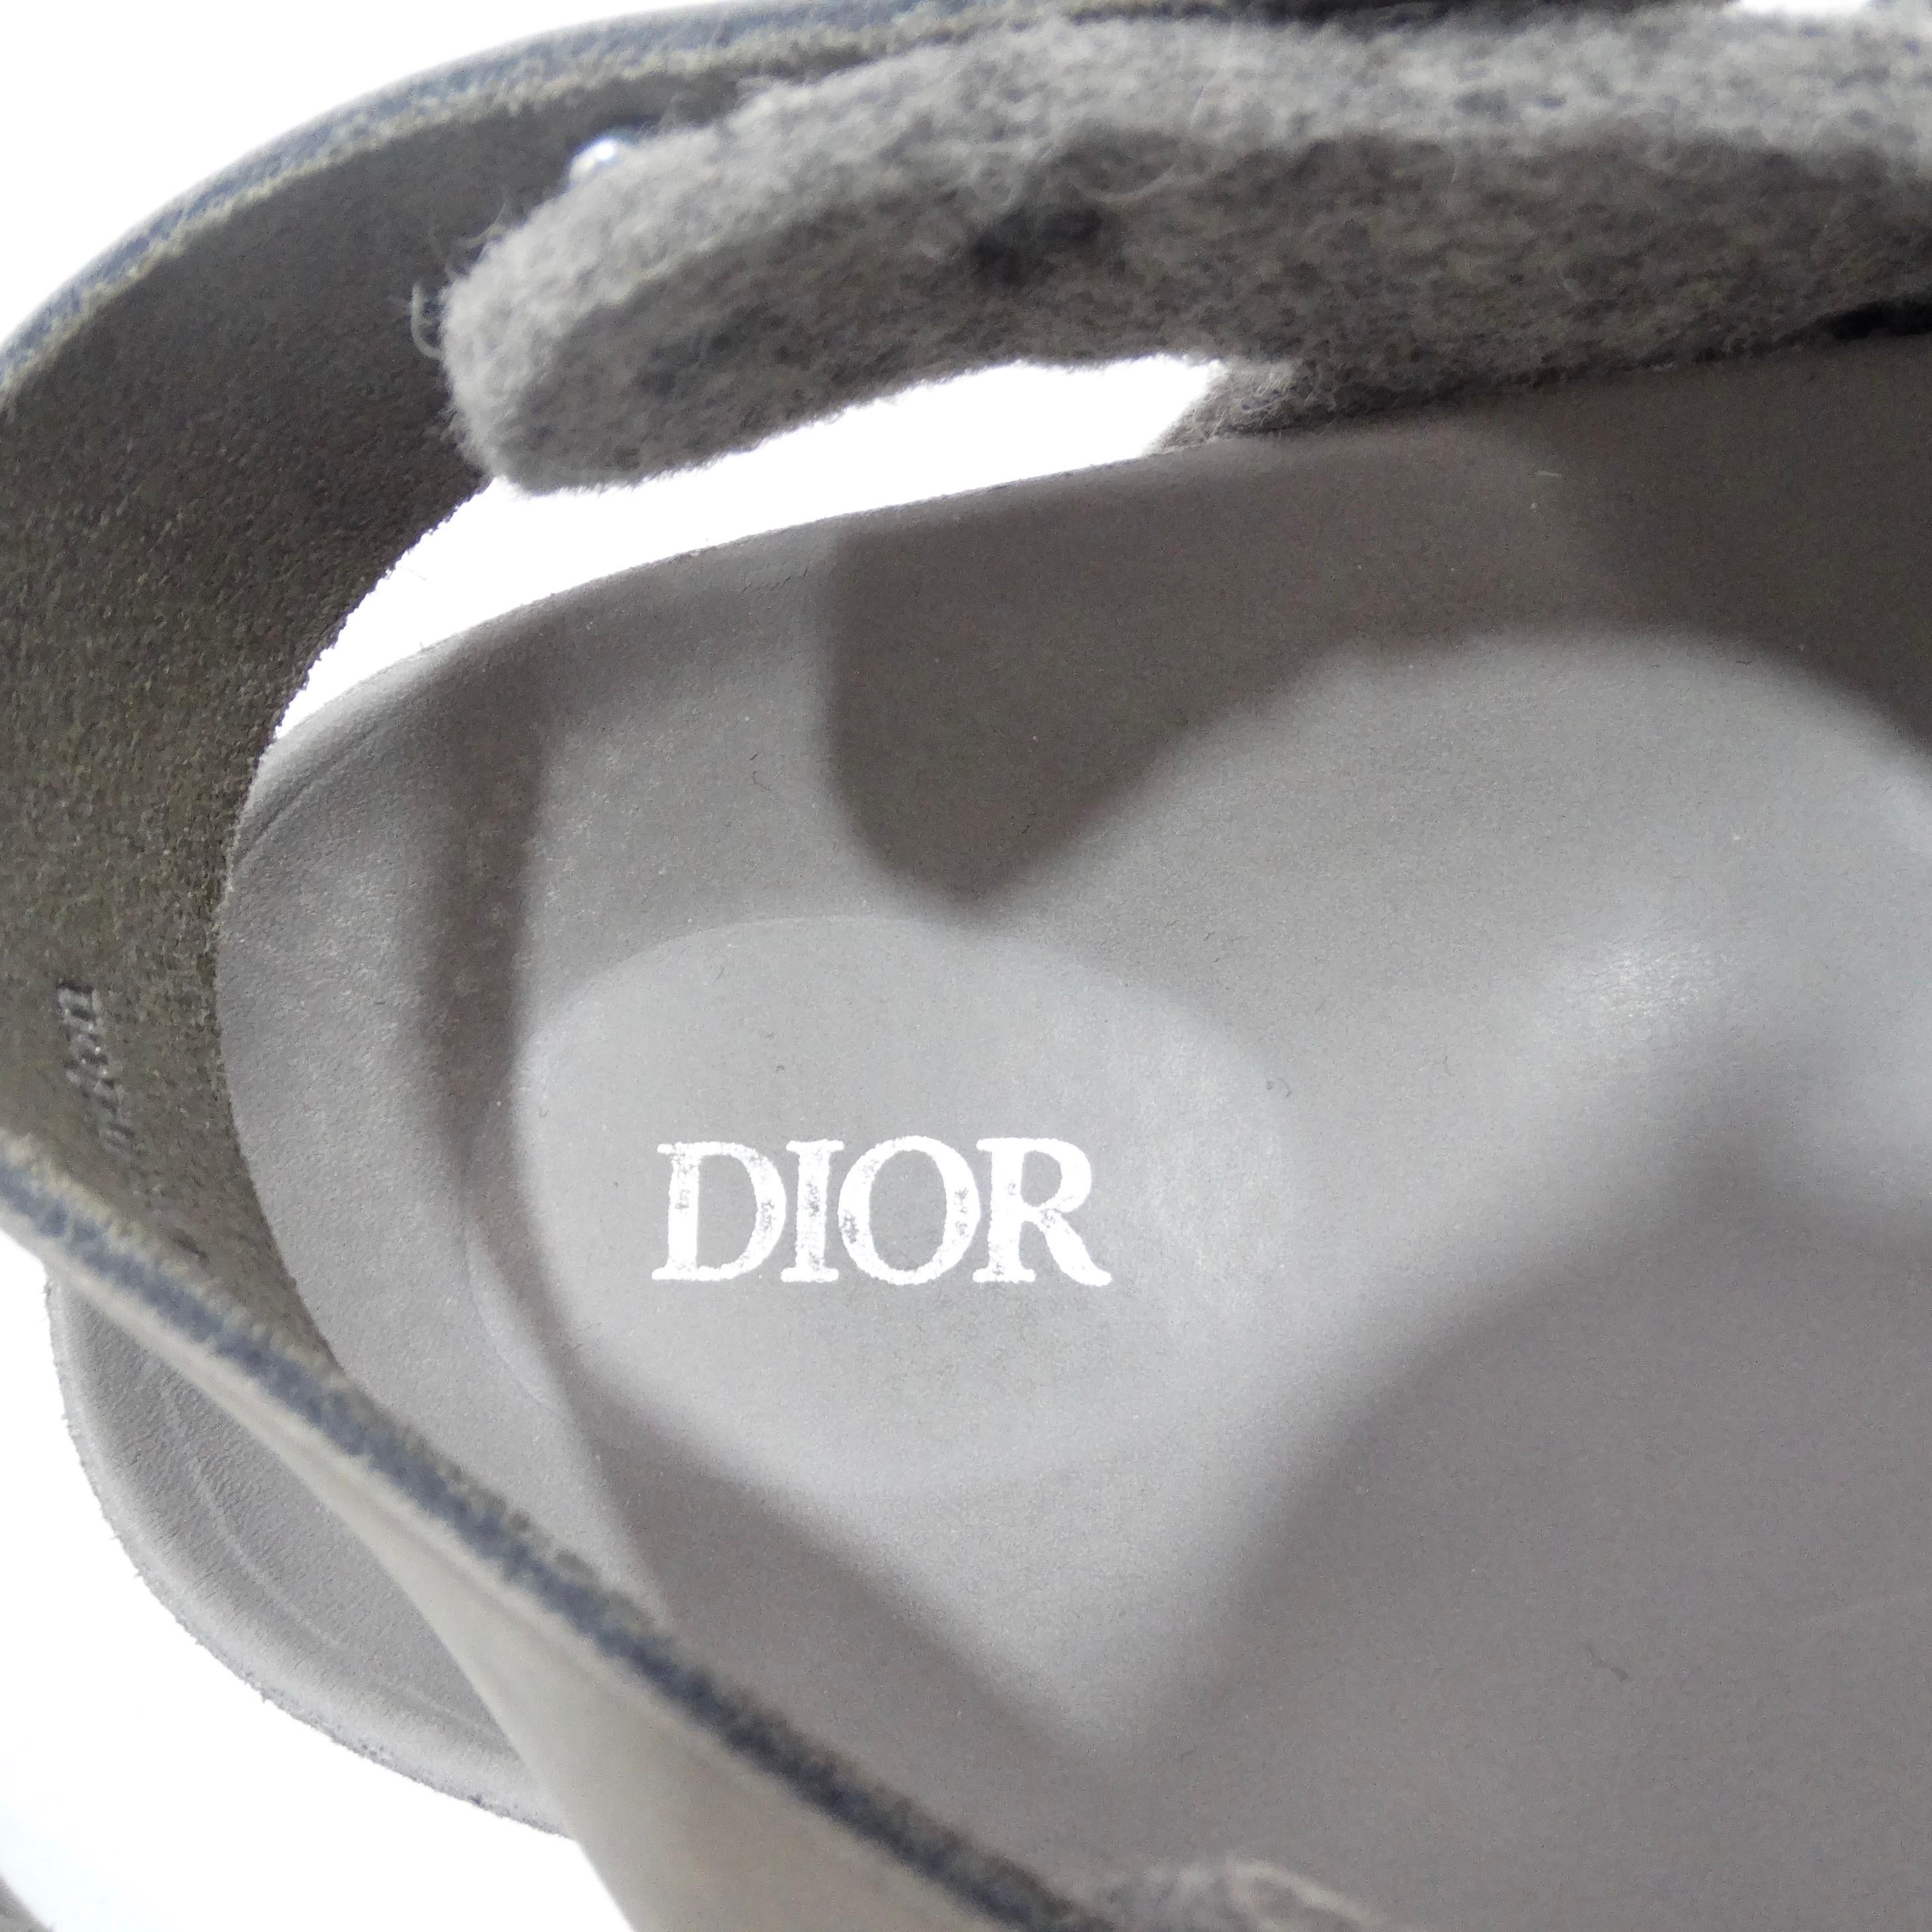 Introducing the Christian Dior By Birkenstock Milano Sandal in Grey – a groundbreaking collaboration that merges the iconic Dior aesthetic with the renowned craftsmanship of Birkenstock. This is not just a sandal; it's a testament to exceptional